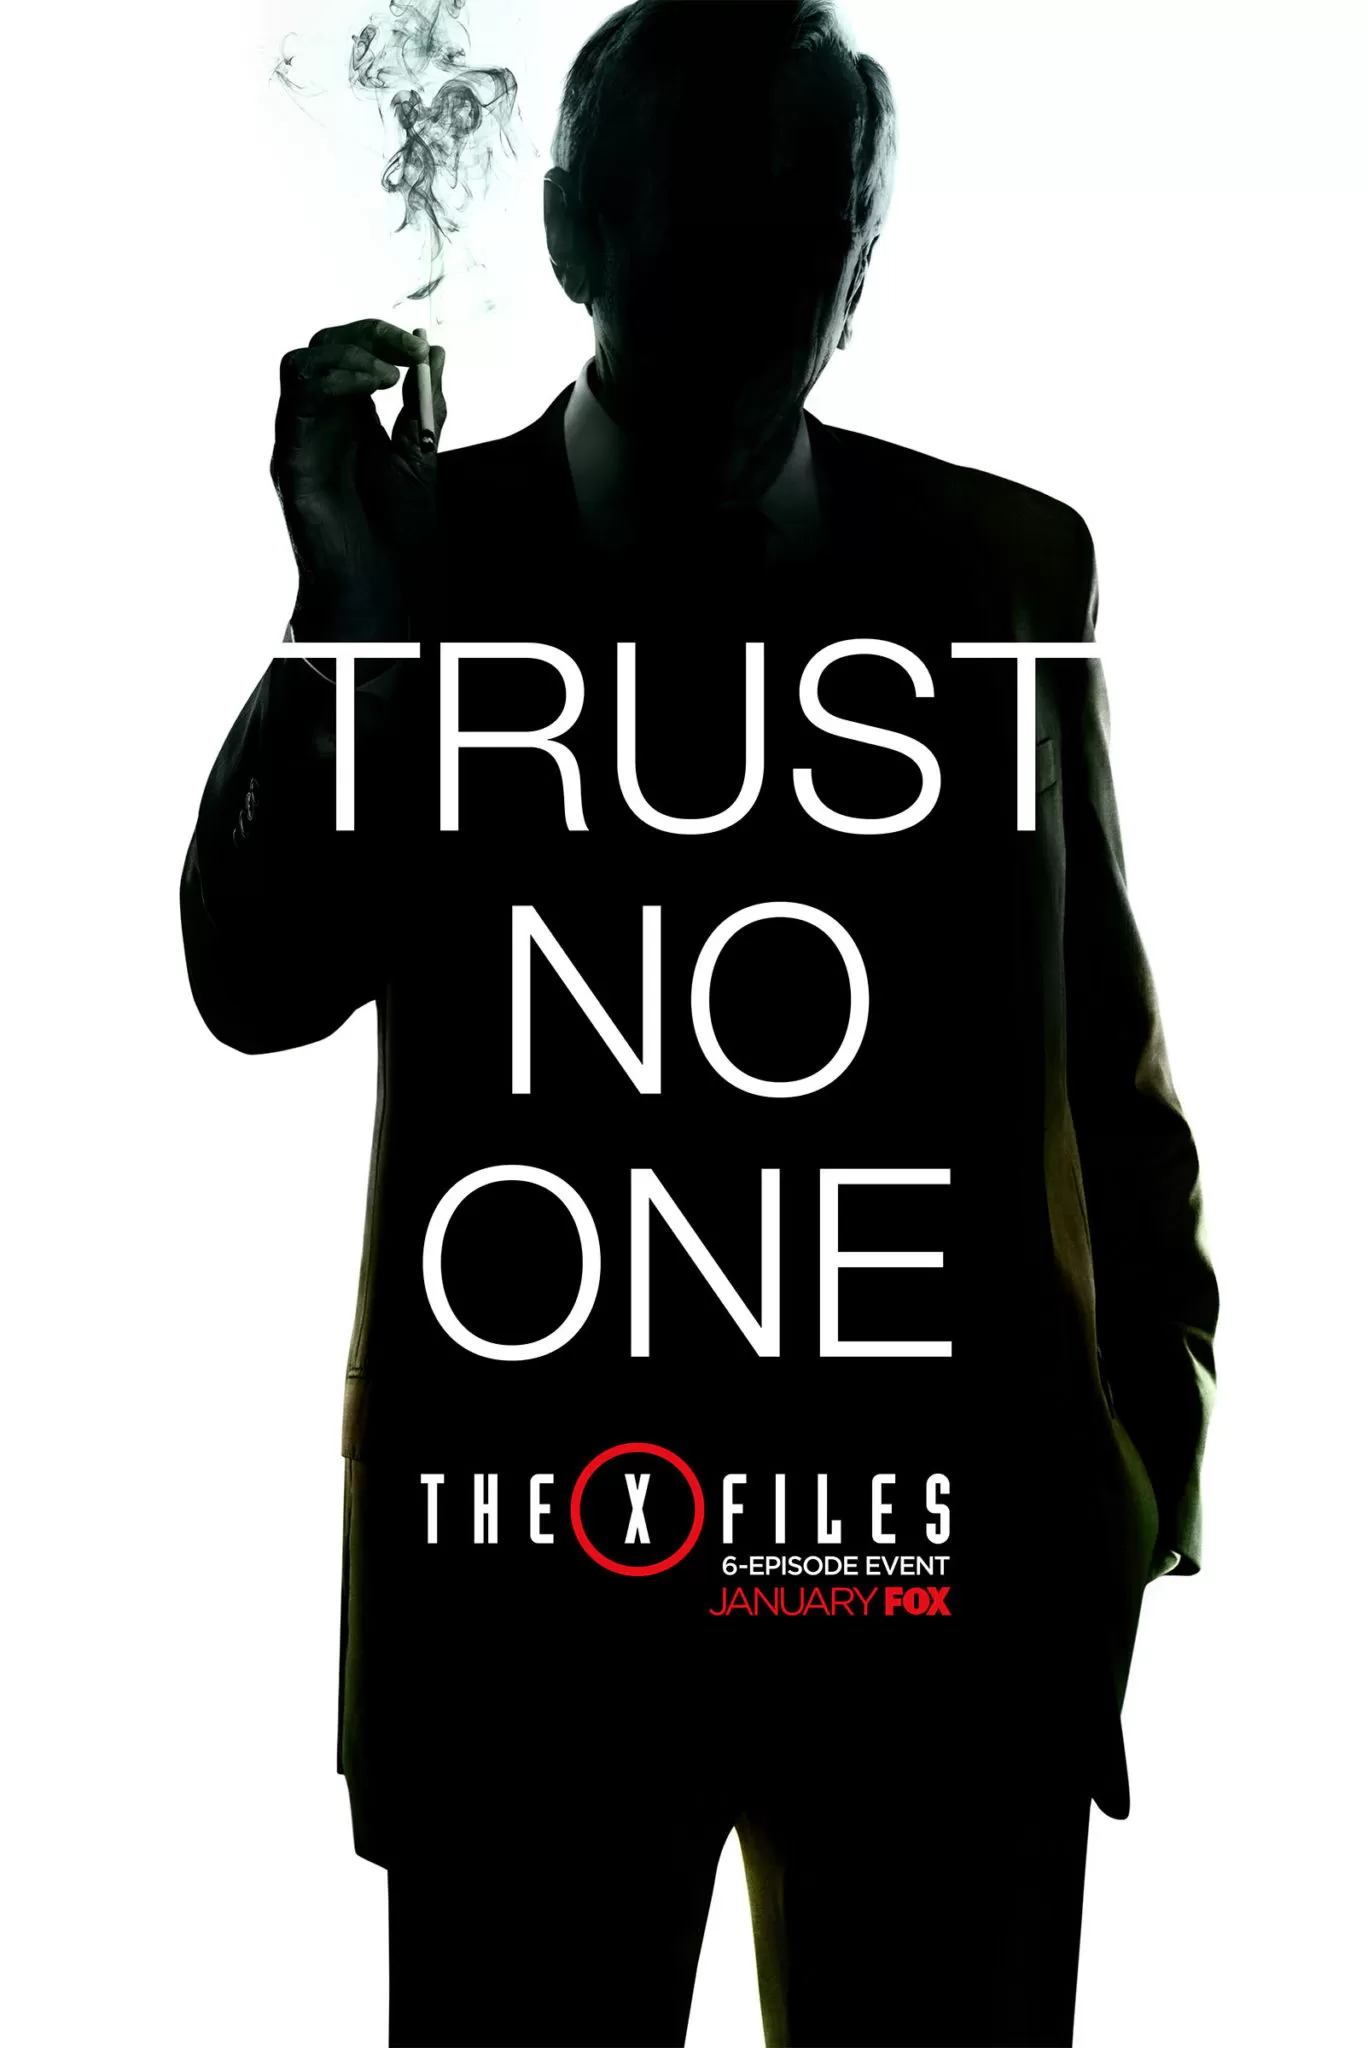 the-x-files-revival-poster-cigarette-smoking-man